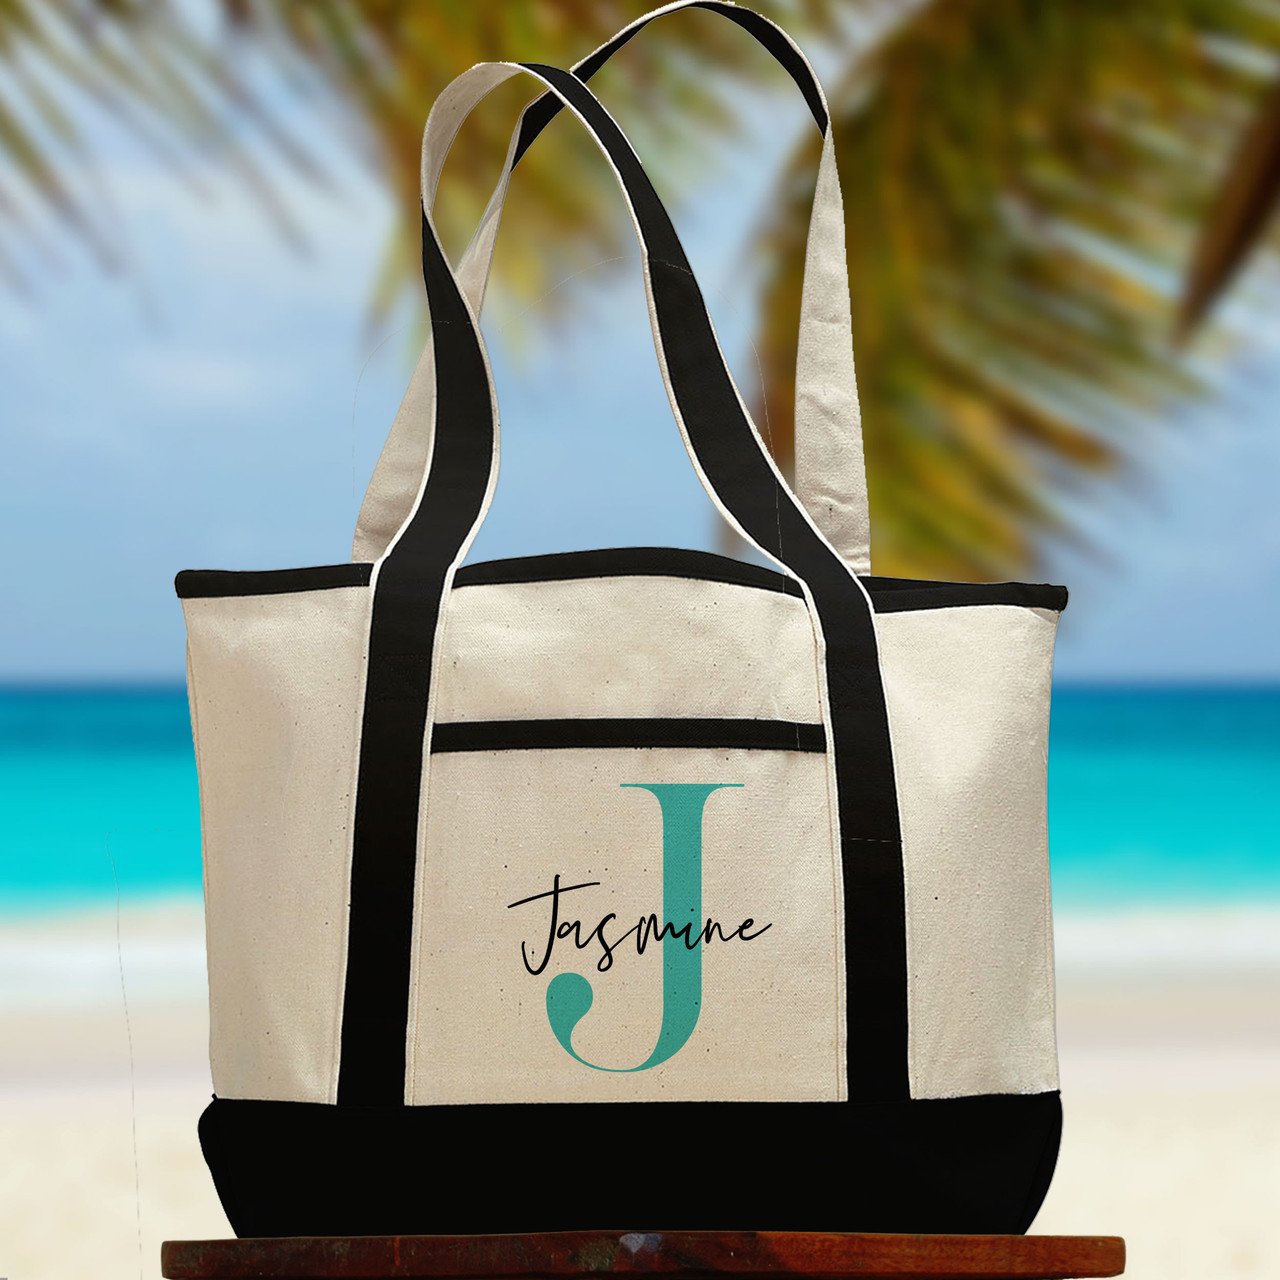 USA Personalized Initial Canvas Beach Bag, Monogrammed Gift Tote Bag for  Women